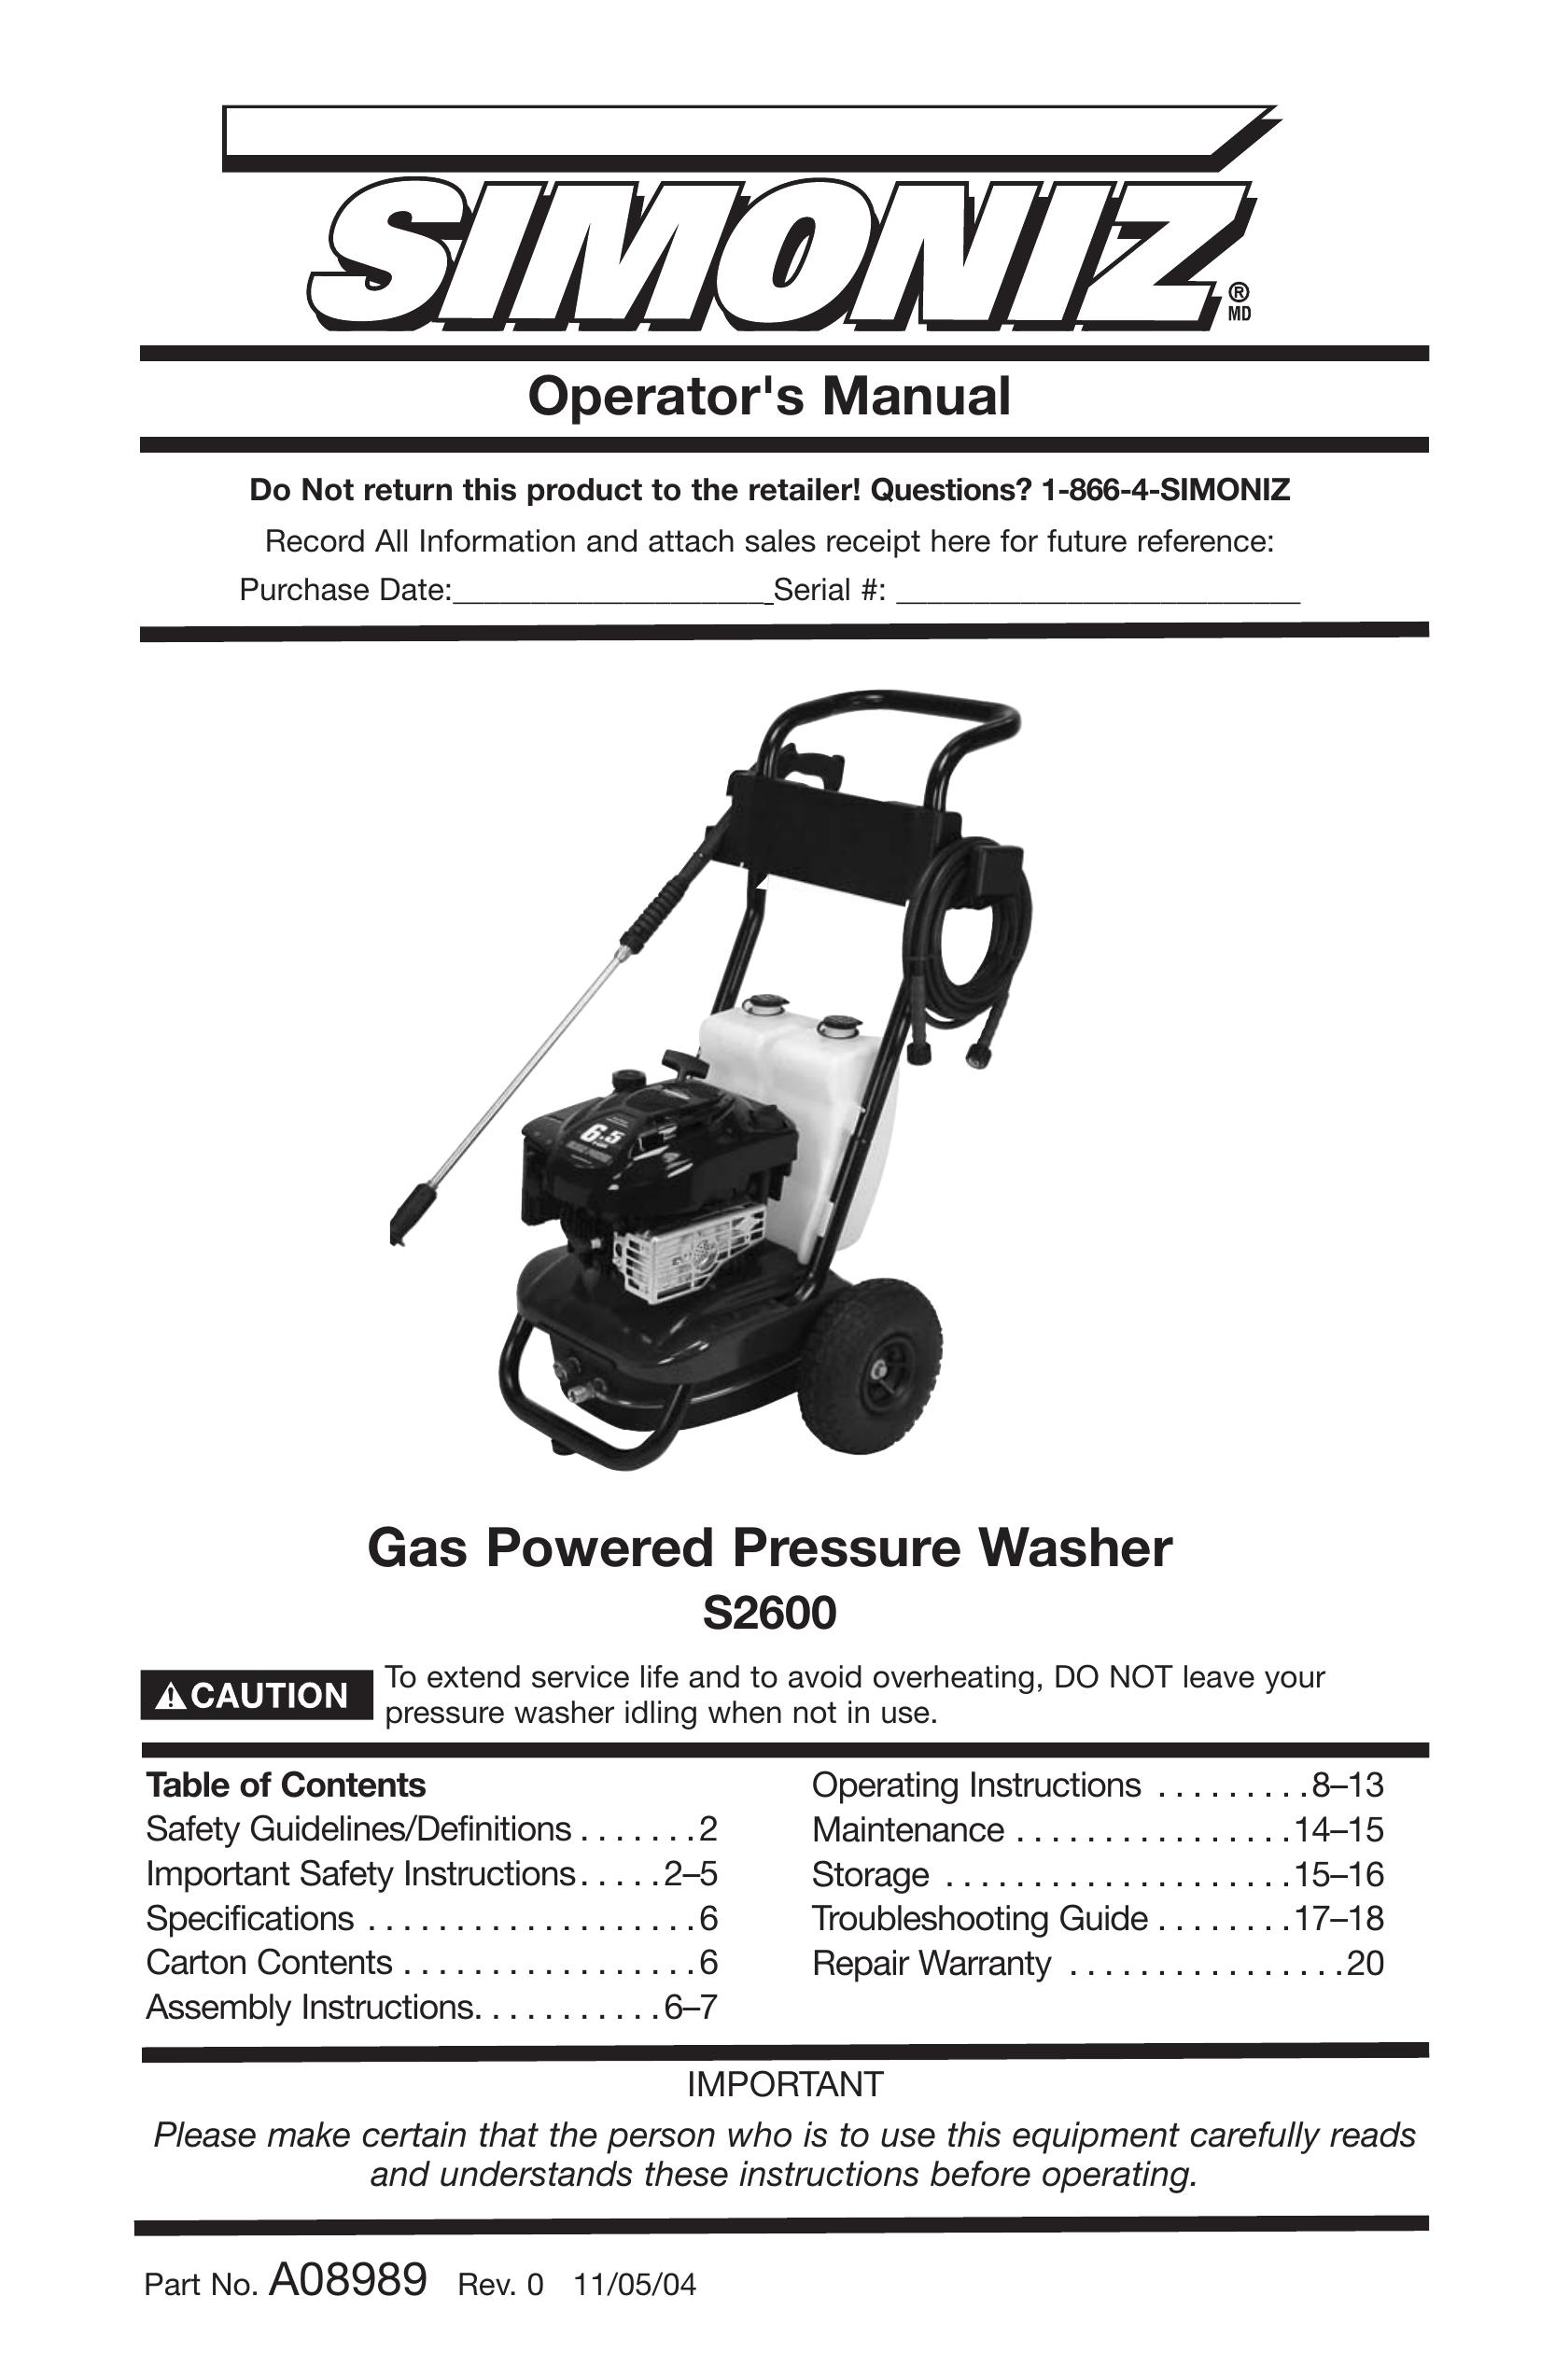 DeVillbiss Air Power Company A08989 Pressure Washer User Manual